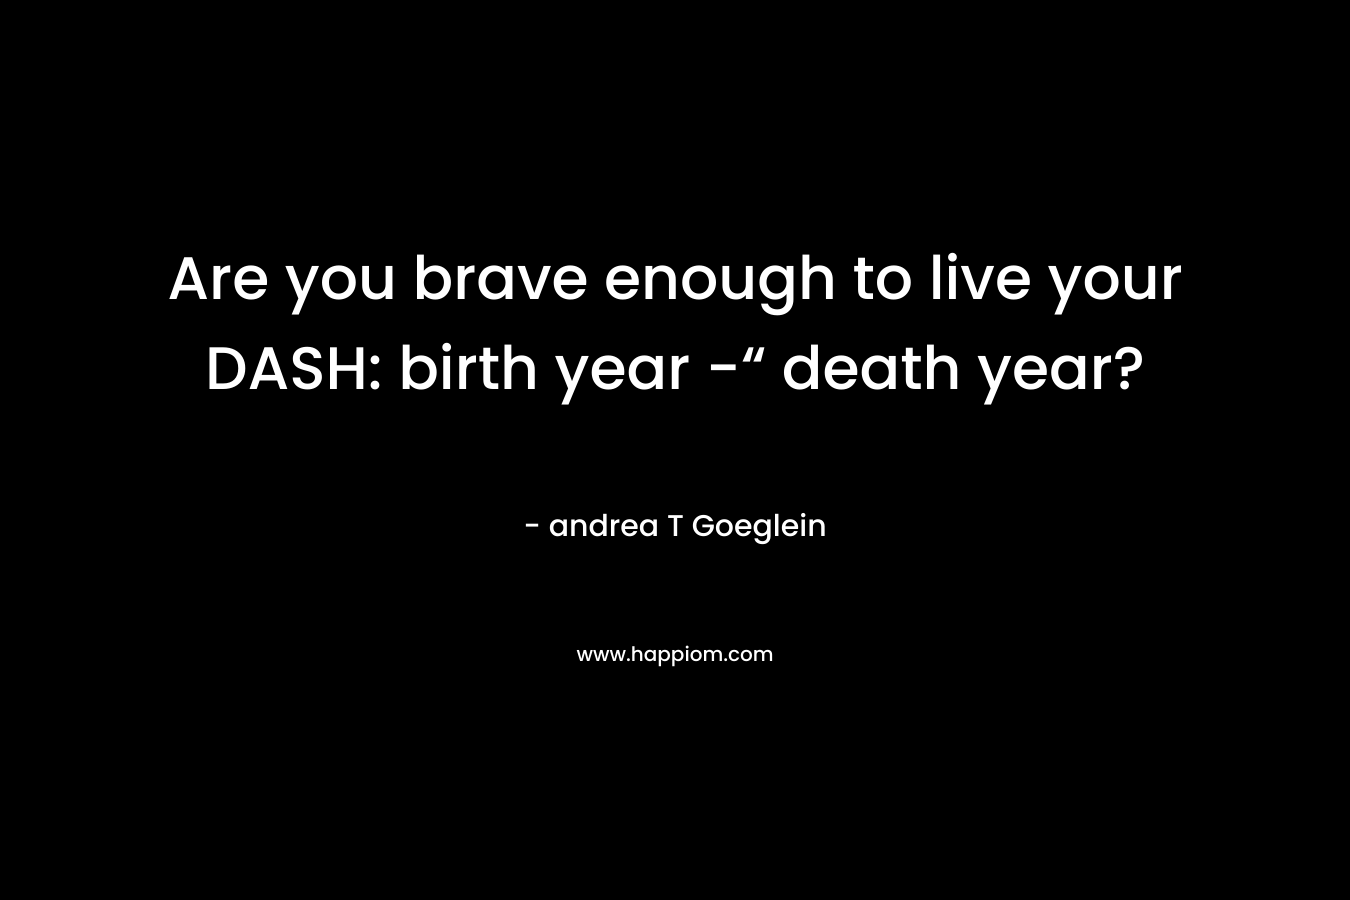 Are you brave enough to live your DASH: birth year -“ death year? – andrea T Goeglein